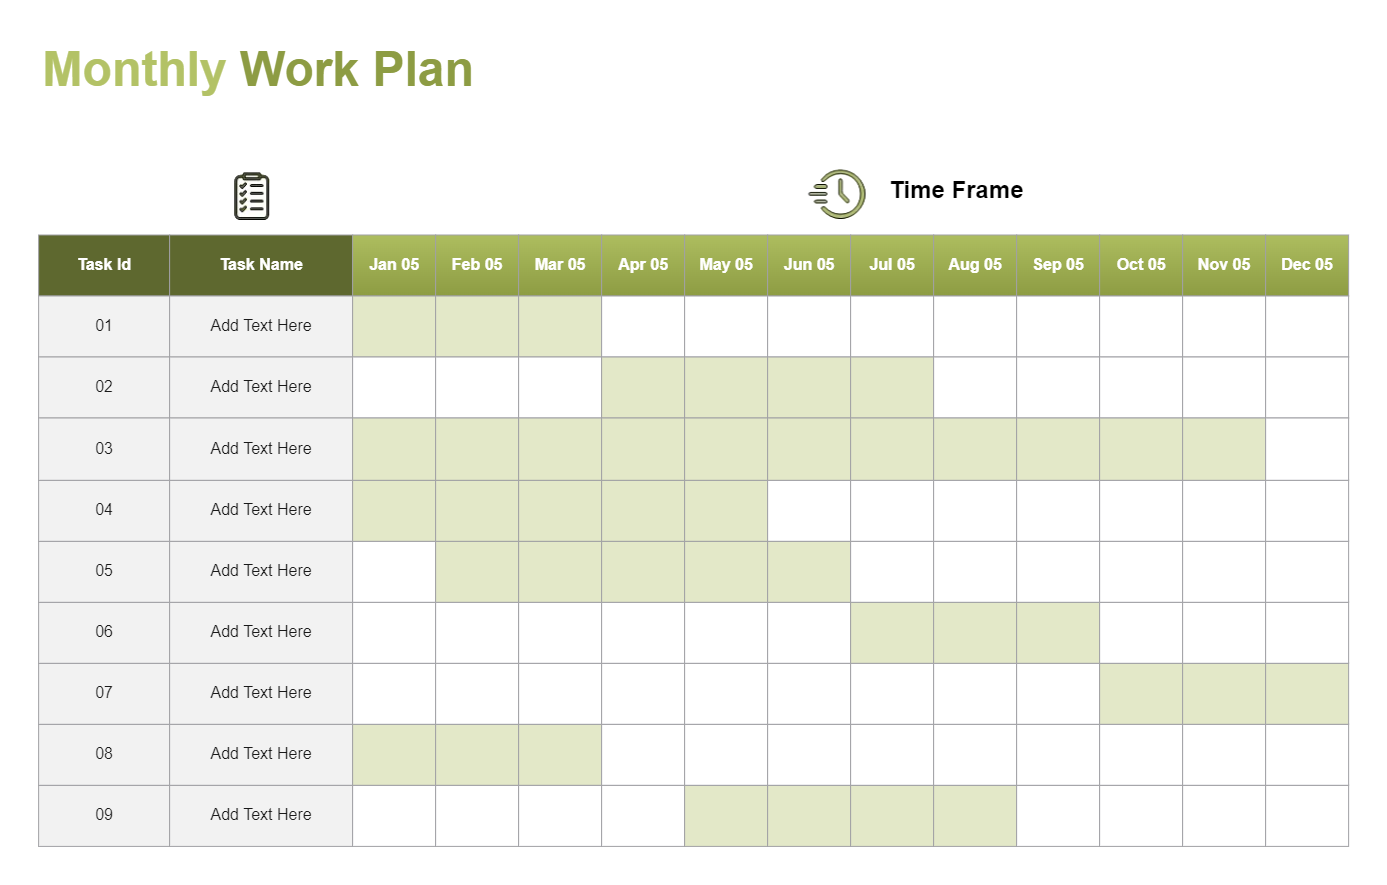 Monthly Work Plan PowerPoint Template